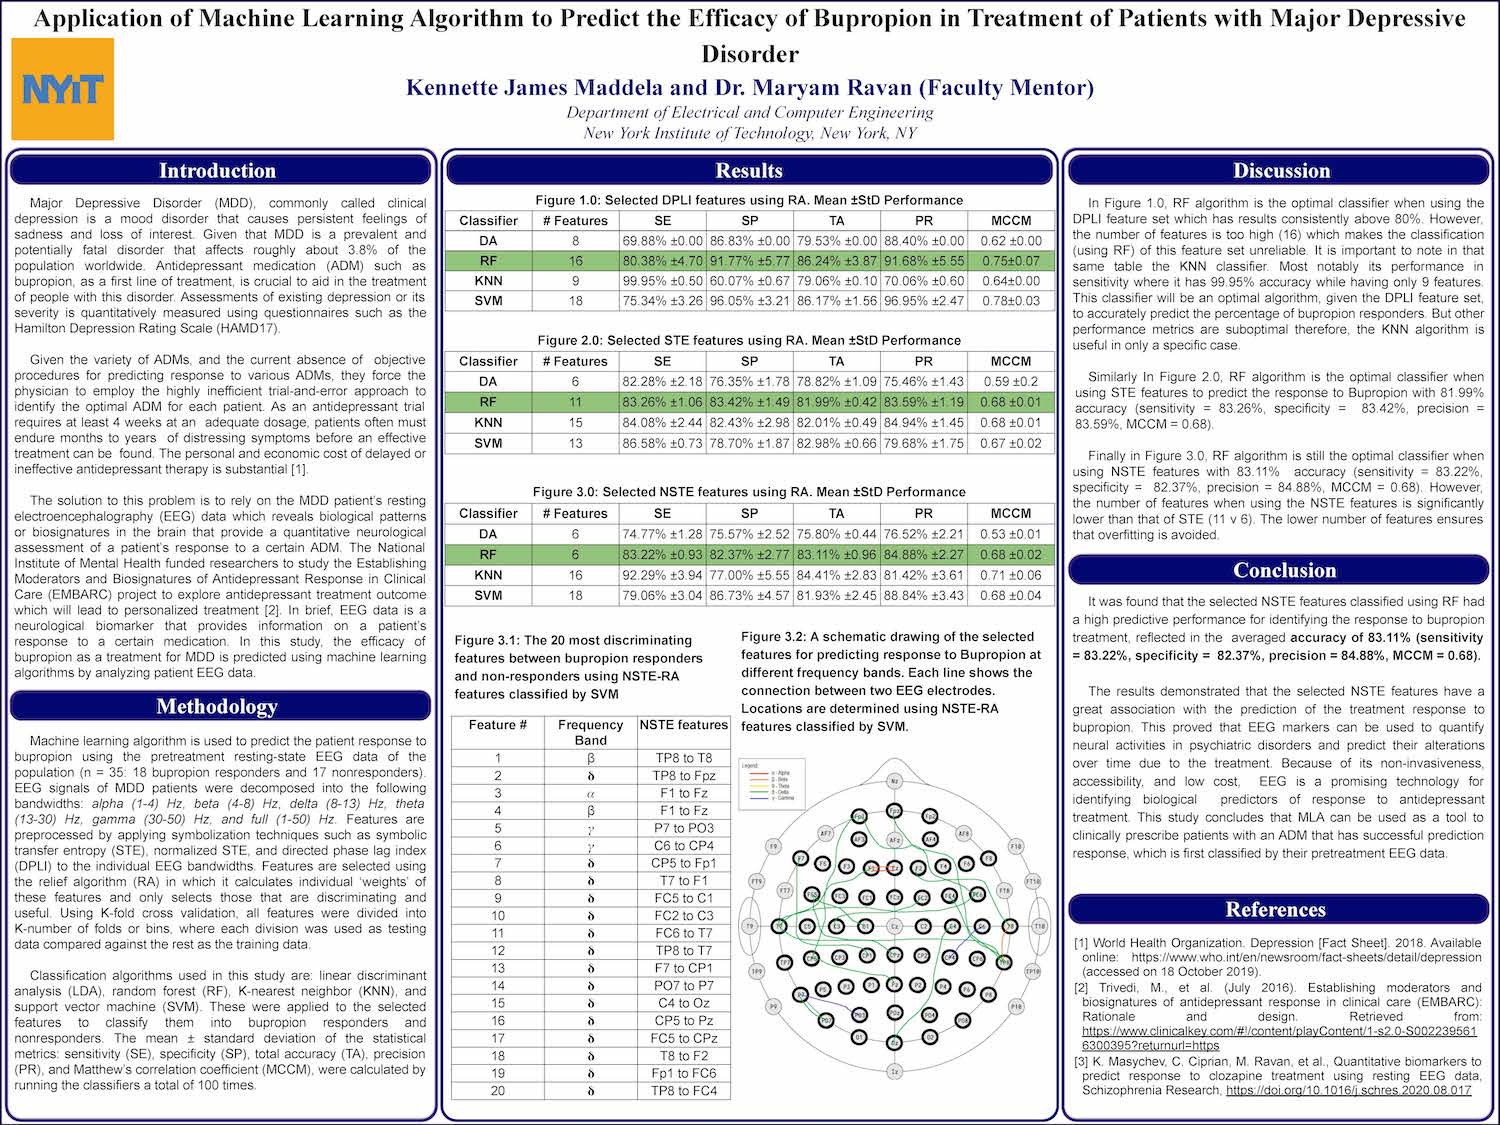 Application of Machine Learning Algorithm to Predict the Efficacy of Bupropion in Treatment of Patients with Major Depressive Disorder